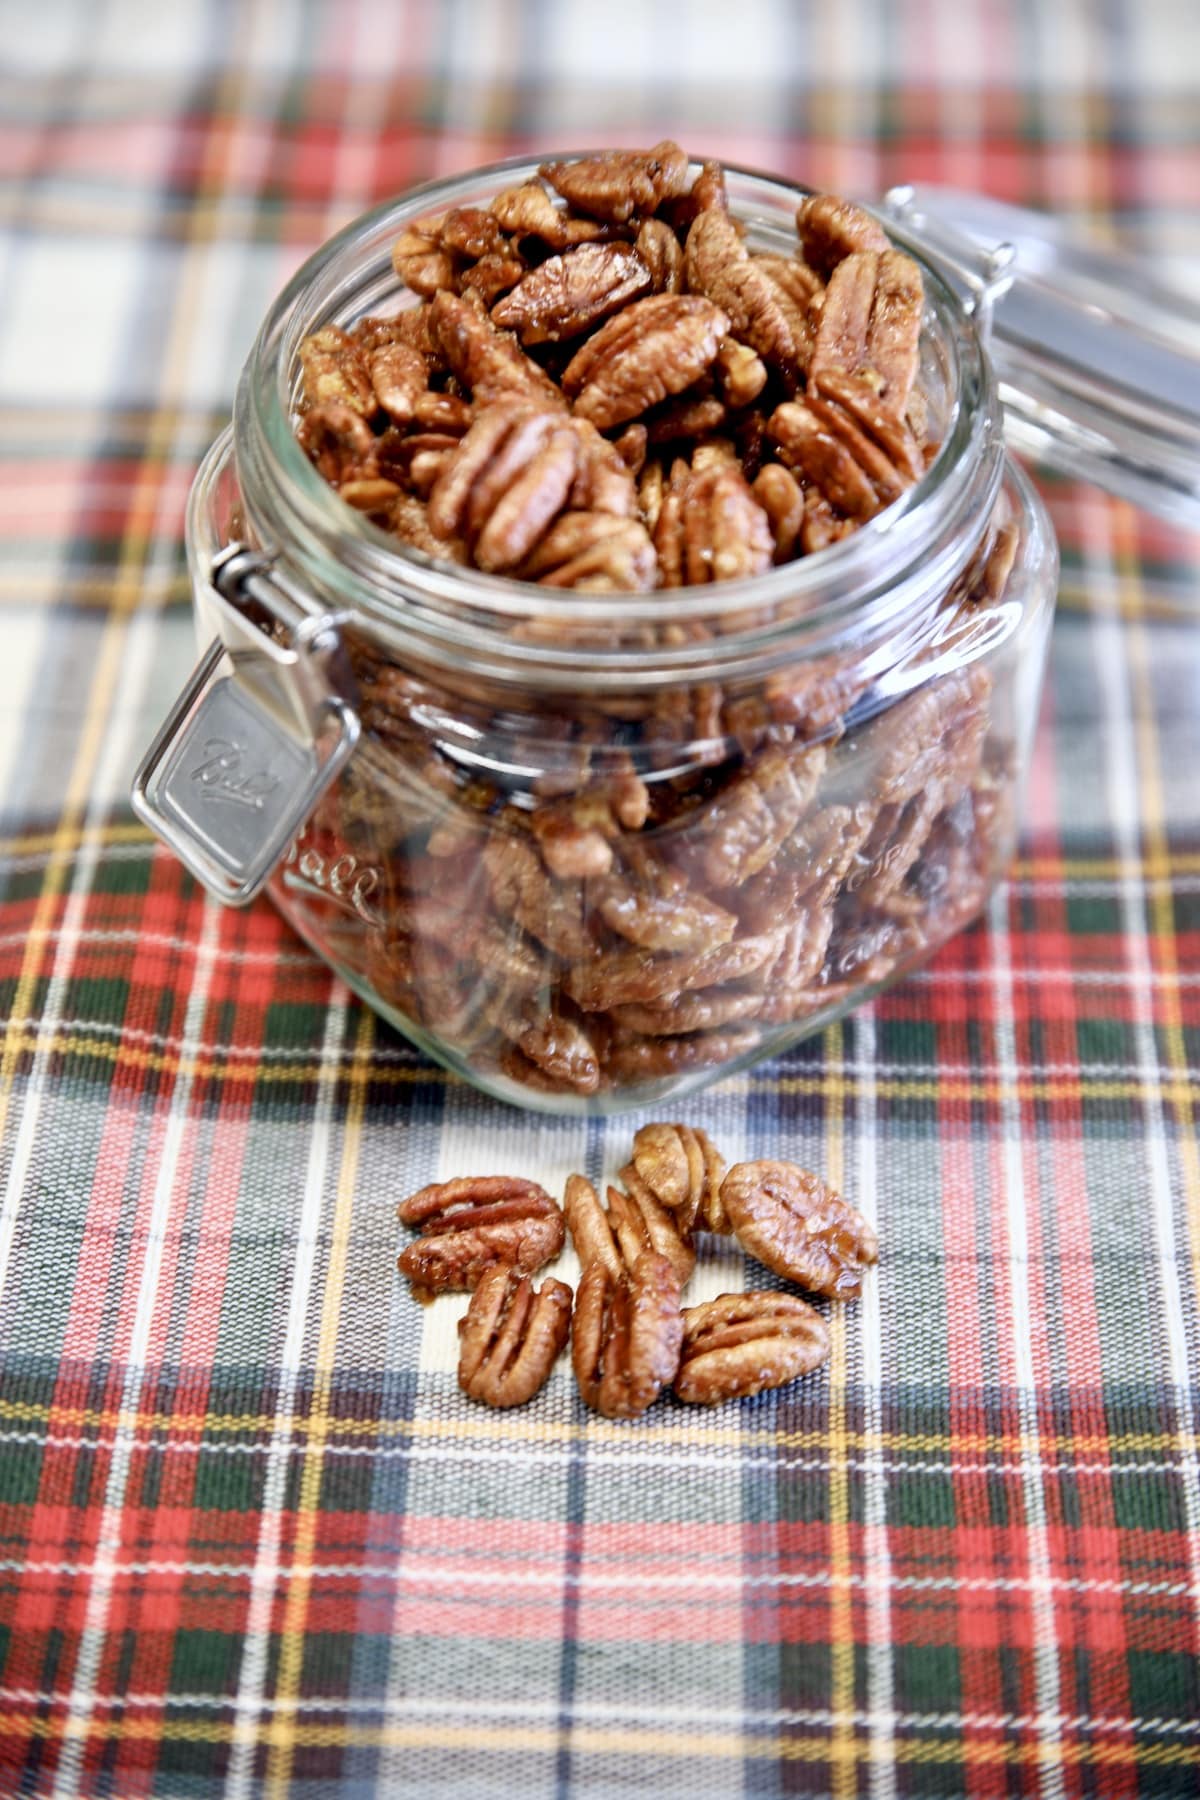 Candied pecans in a jar on a Christmas plaid cloth, a few pecans in front.